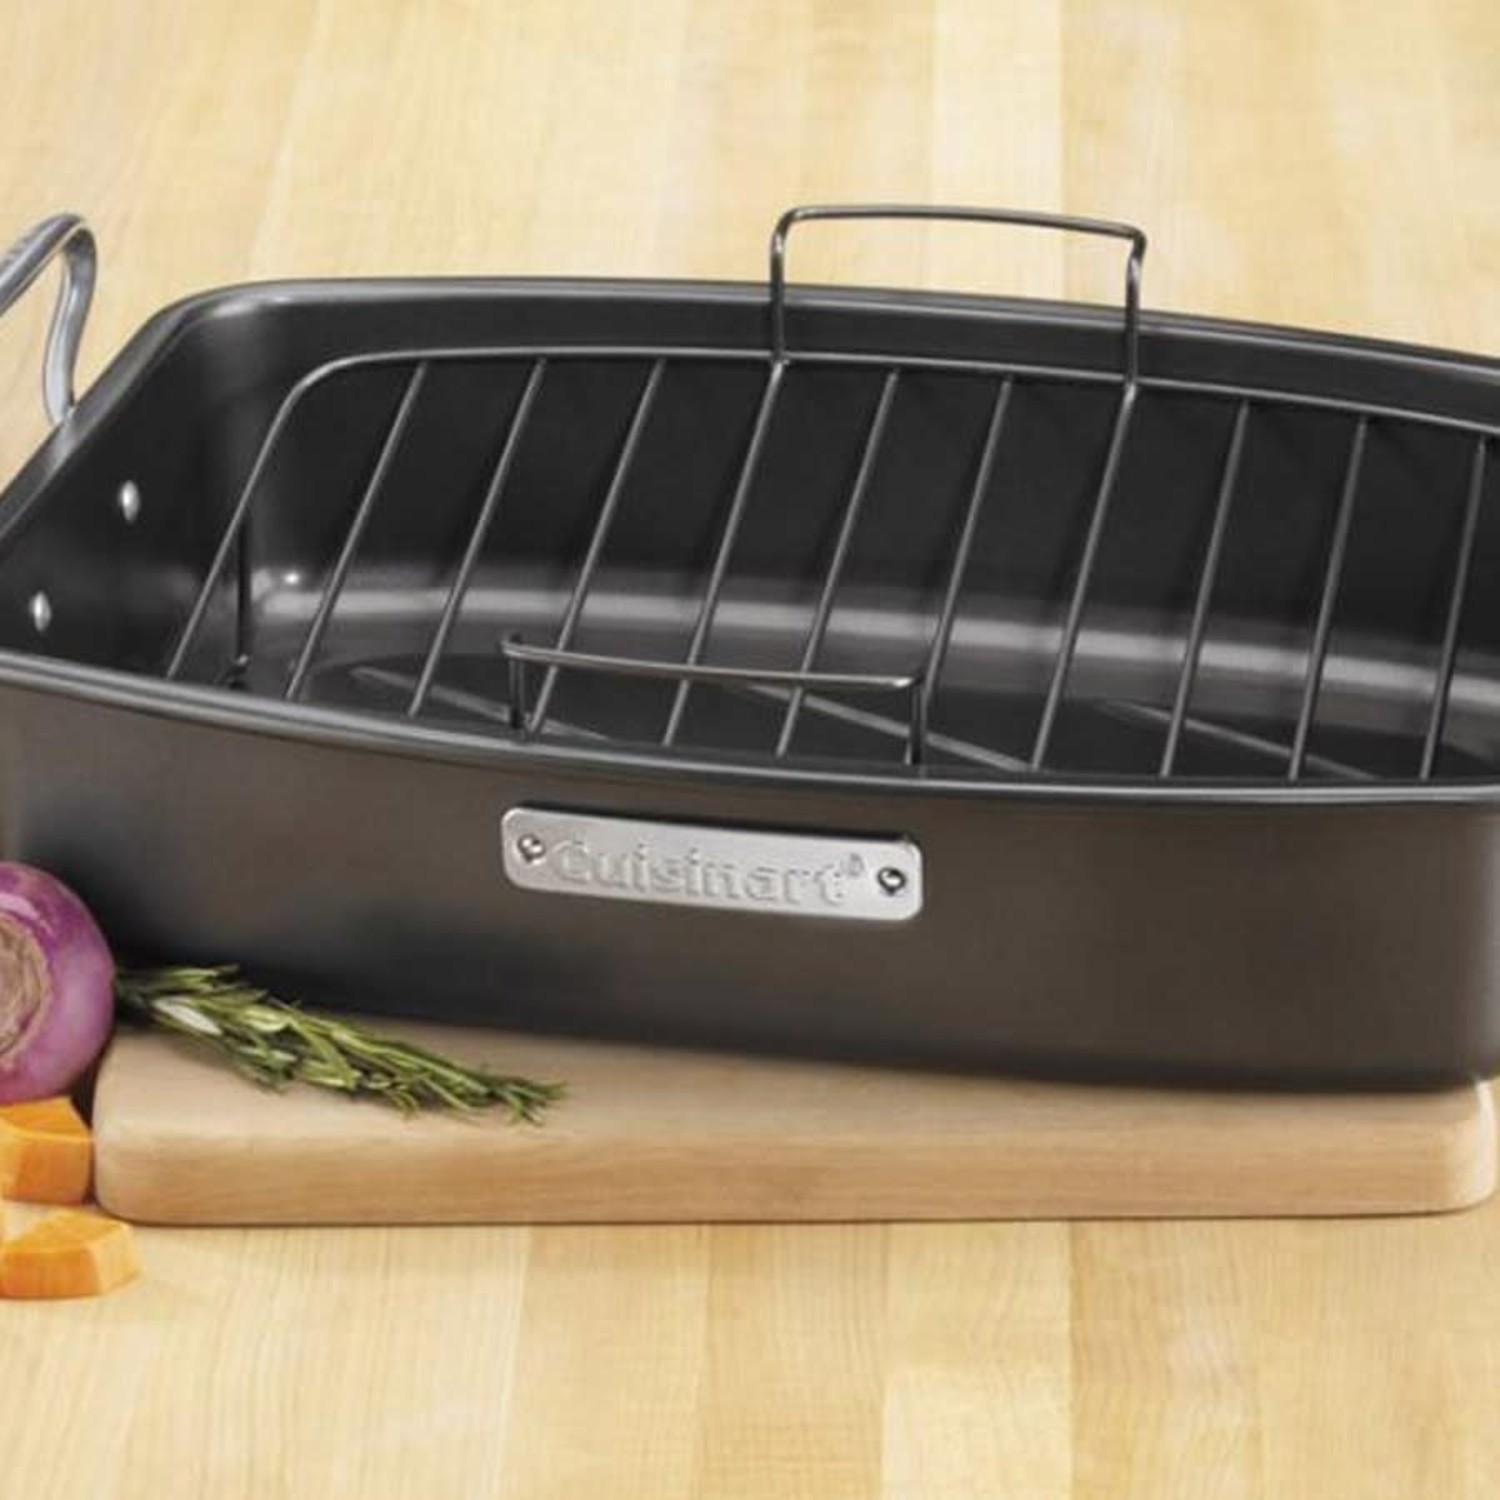 The Cuisinart Stainless Roasting Pan, Reviewed